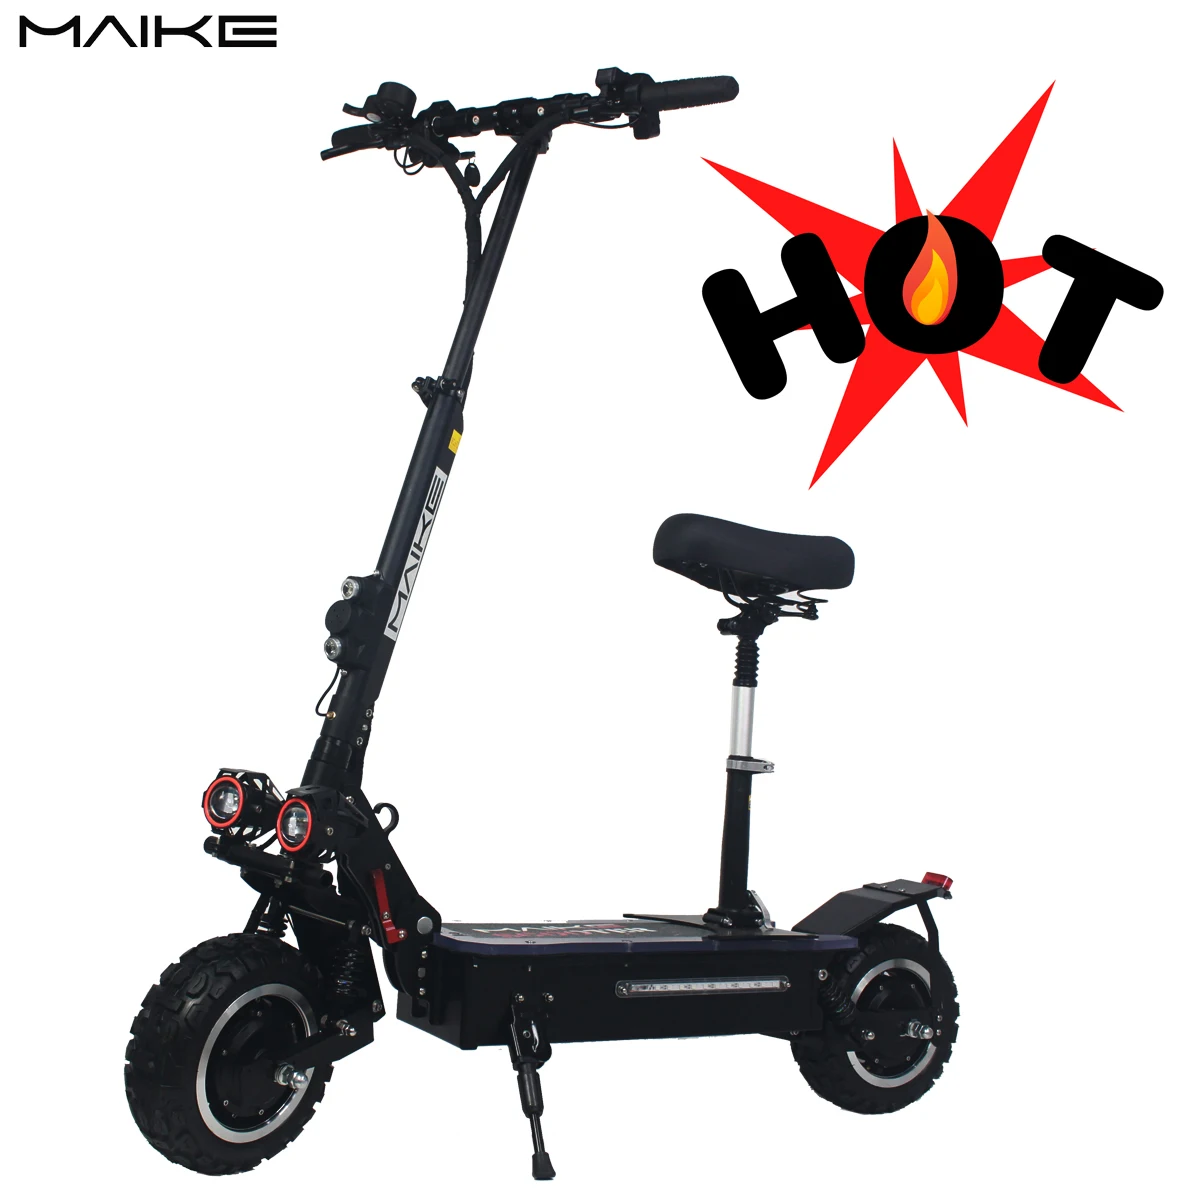 

Hight Quality Low Price Maike popular kk4s 11inch 60v 3200w dual motor folding off road citycoco electric kick scooters